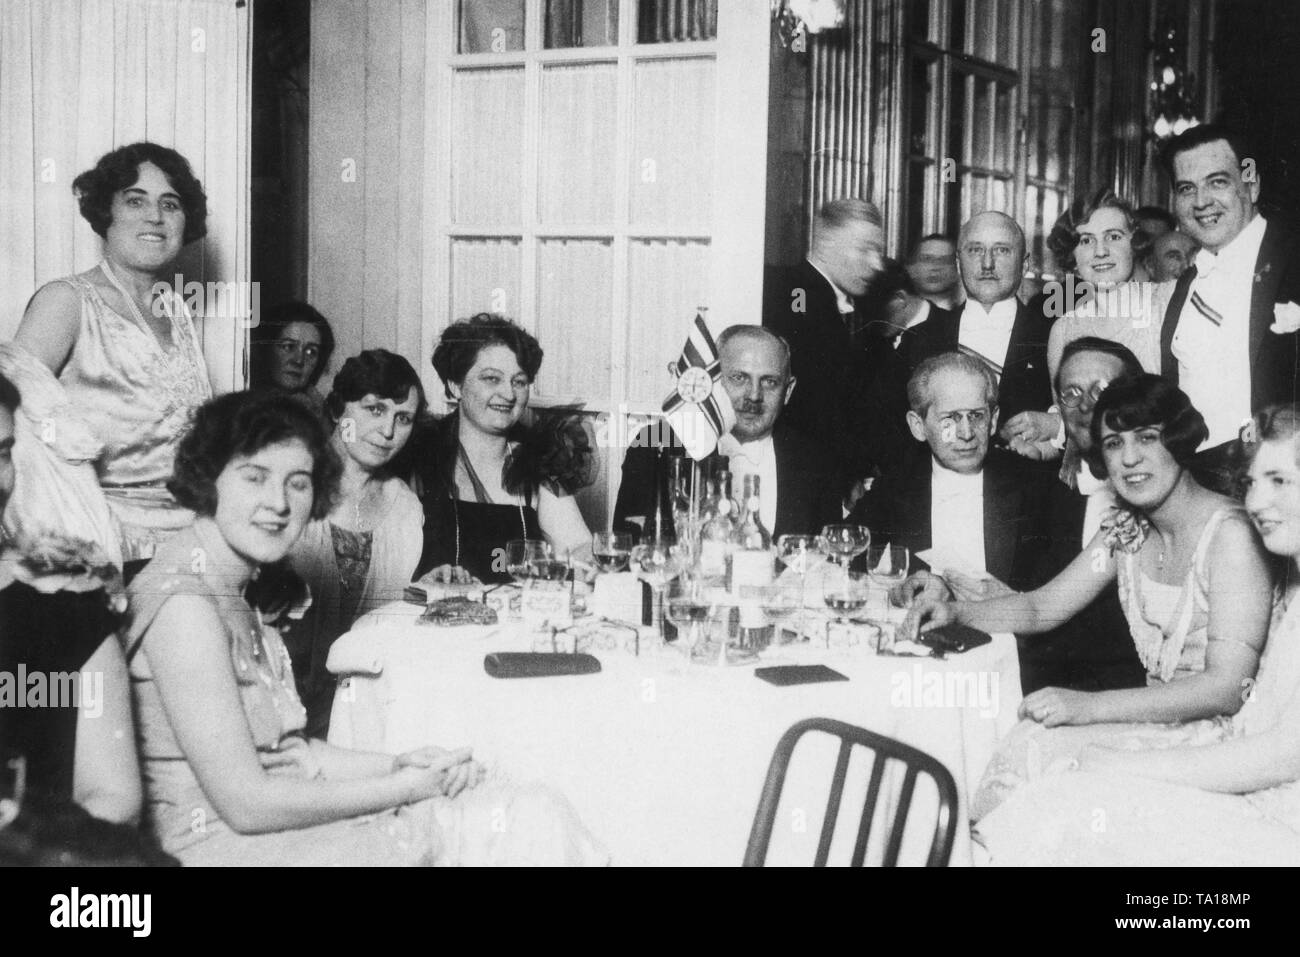 Members of the Koesener Senioren-Convents-Verband organized a ball In the Berlin Hotel Esplanada. Right with pince nez, the poet Arno Holz. On the table stands a flag of the association. Stock Photo